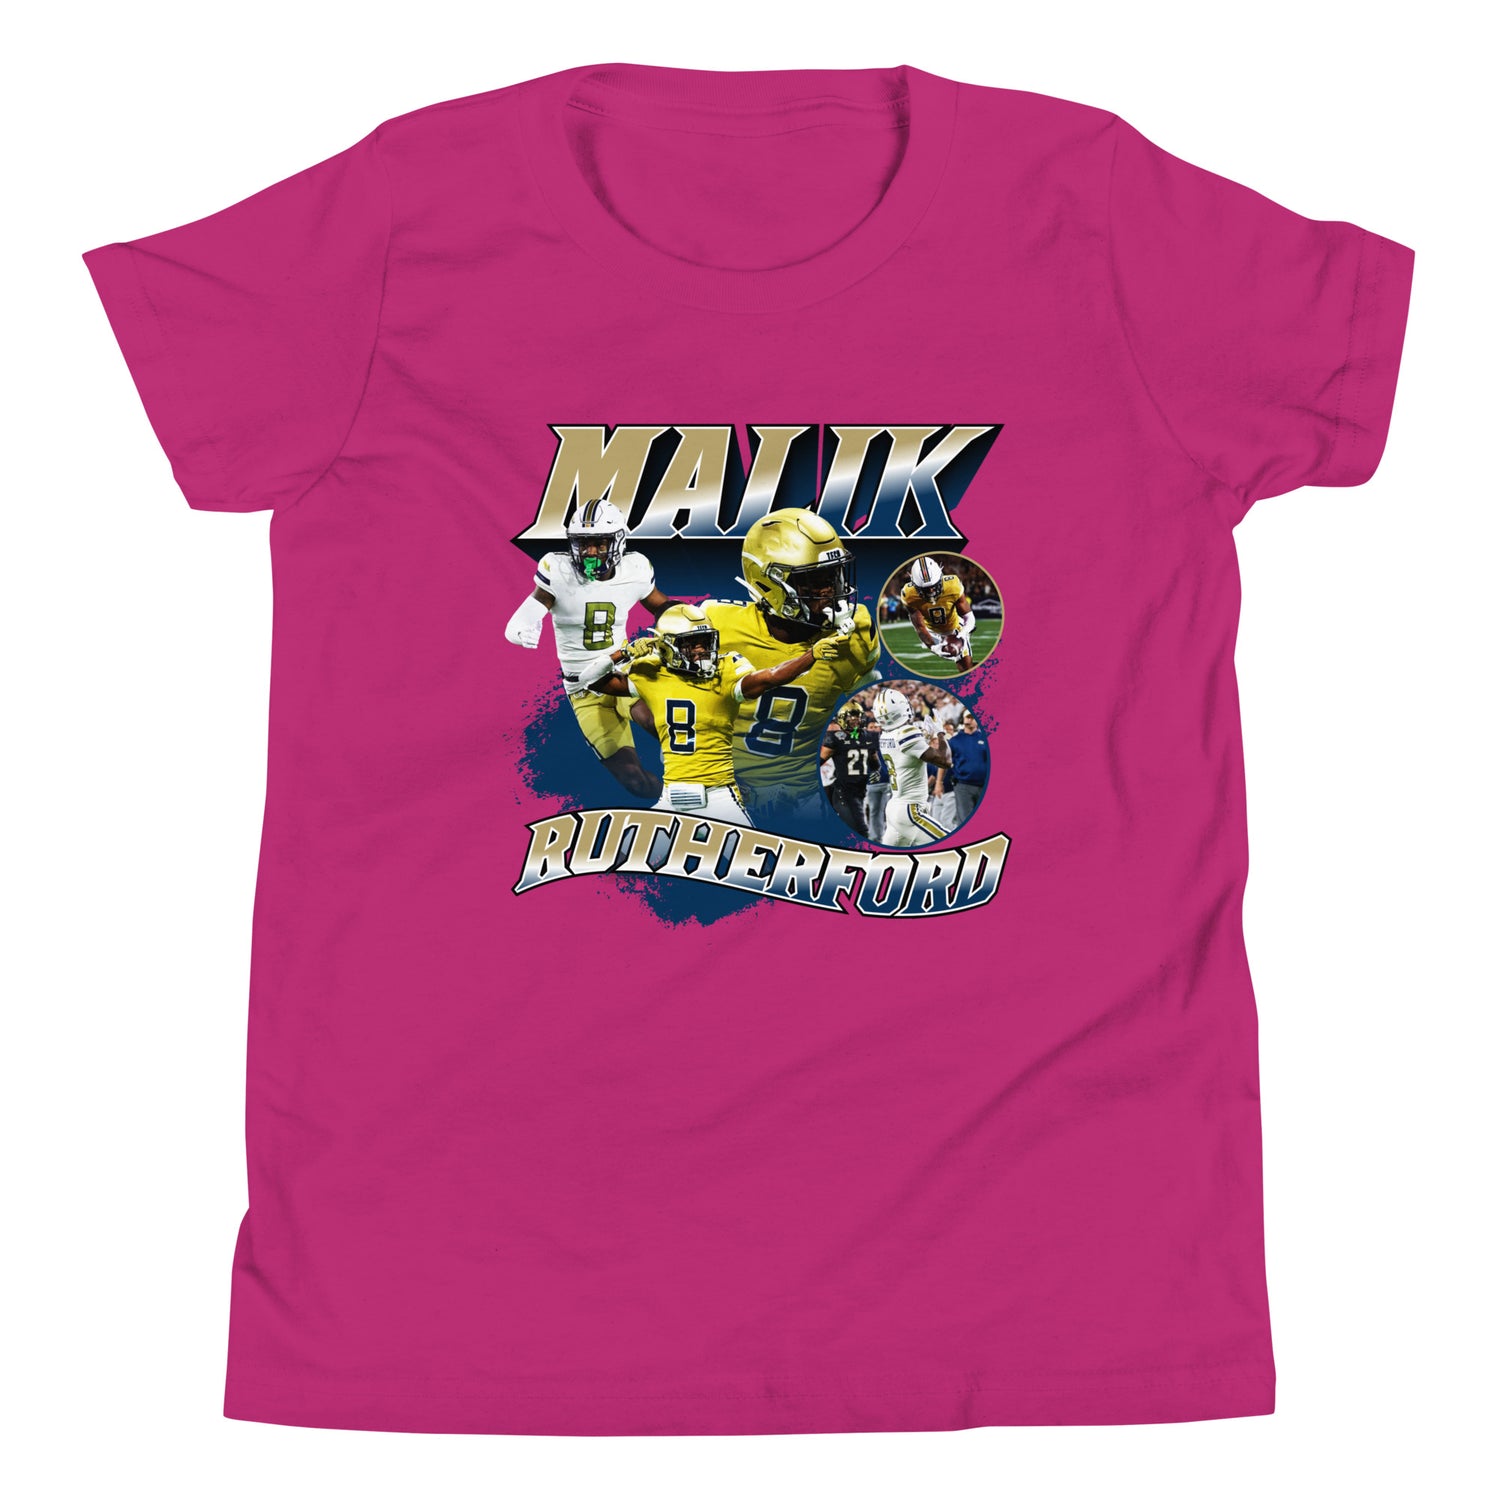 Malik Rutherford "Vintage" Youth T-Shirt - Fan Arch